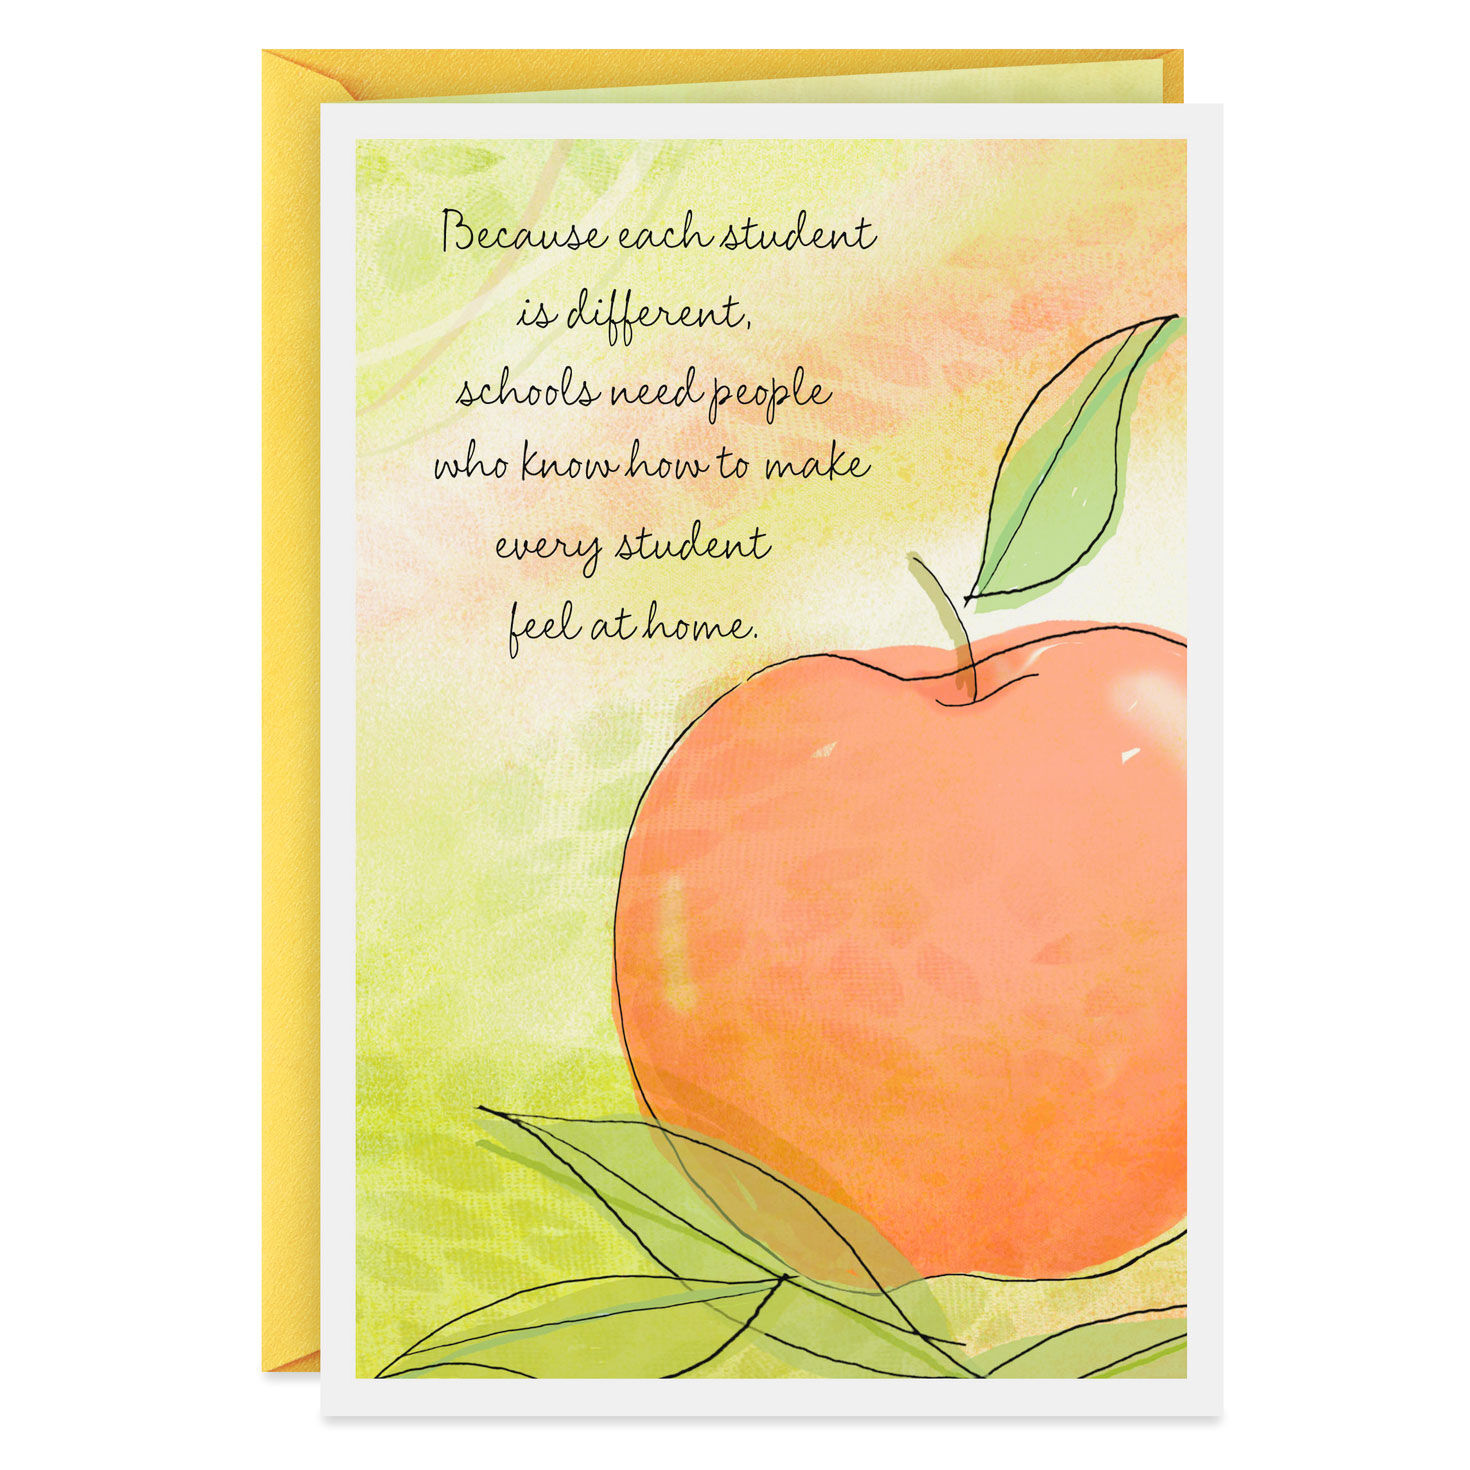 Schools Need People Like You Thank-You Card for Teacher for only USD 2.00 | Hallmark